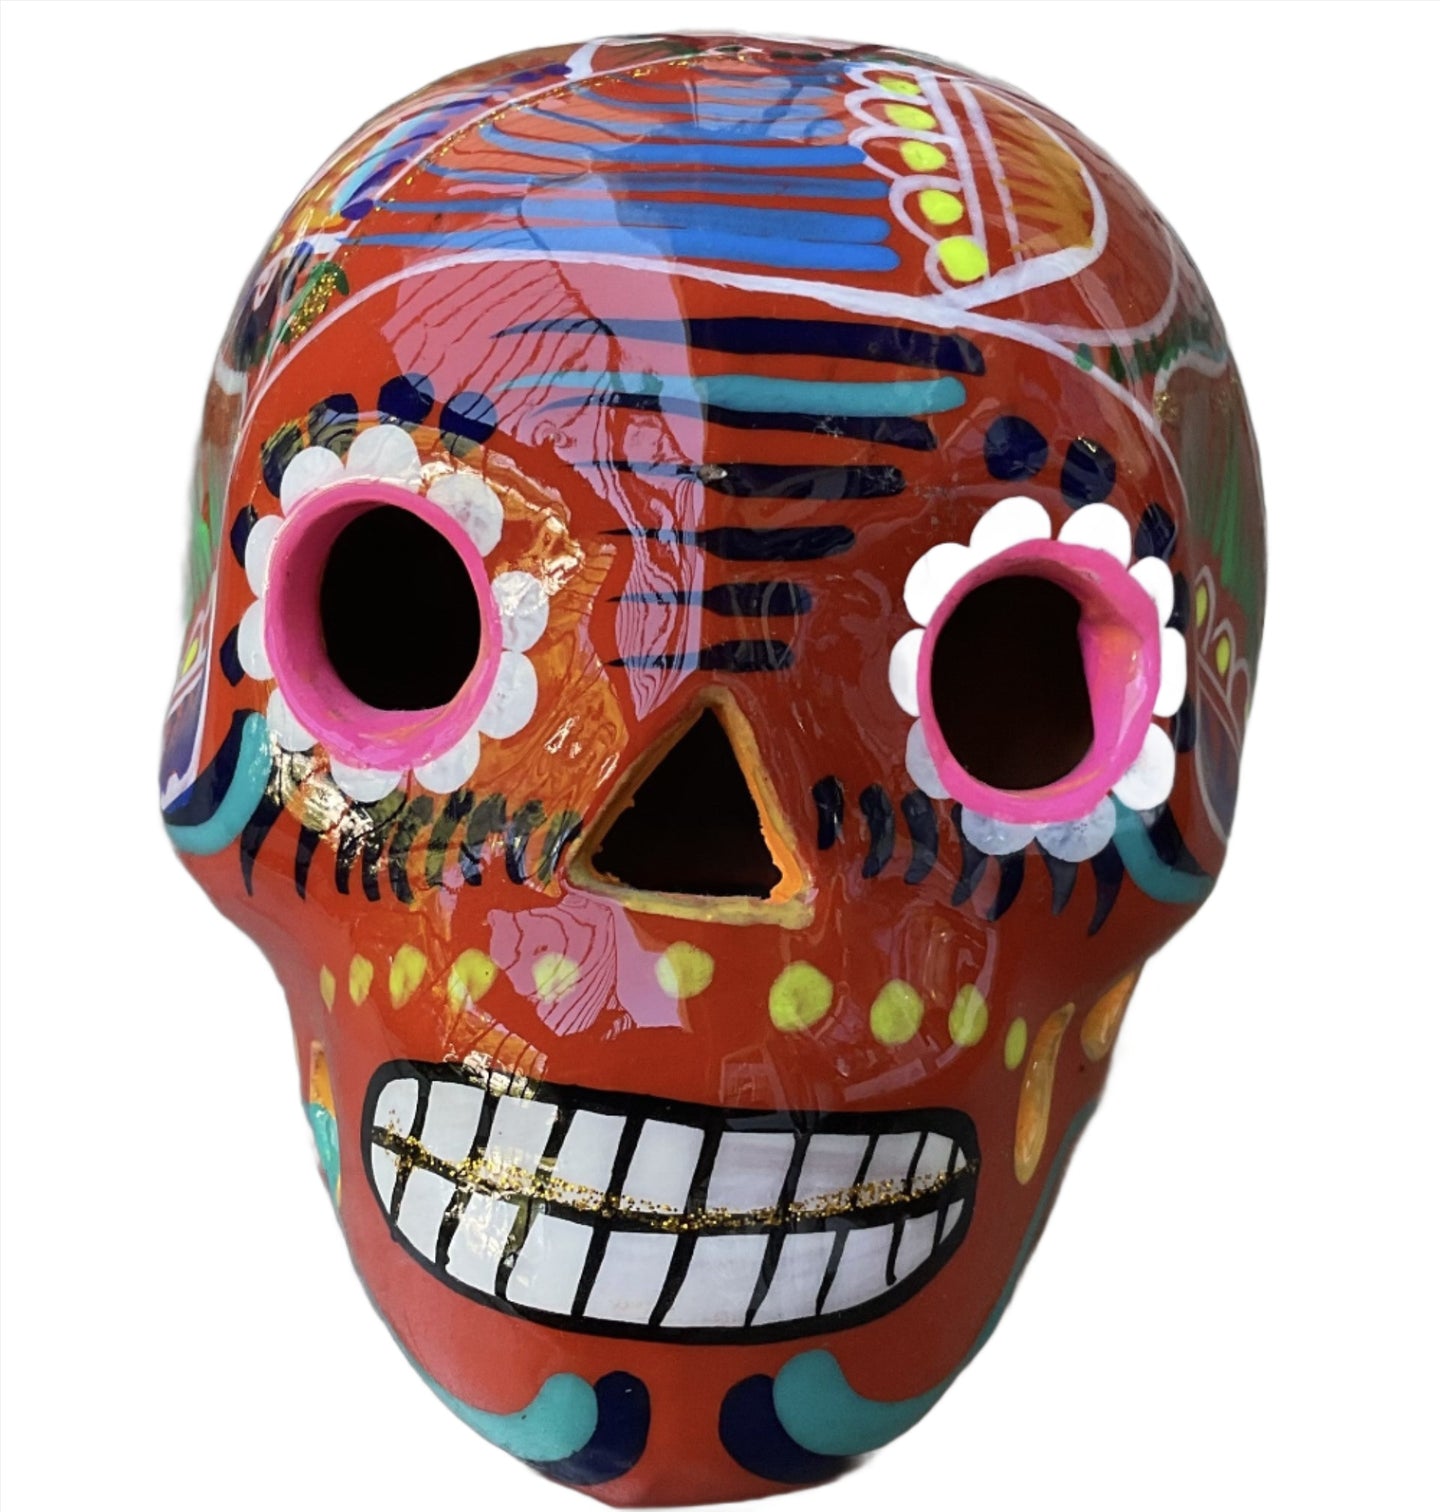 Sugar Skull Large Double Fired Ceramic Mexico Folk Art Day of the Dead-Large, Orange